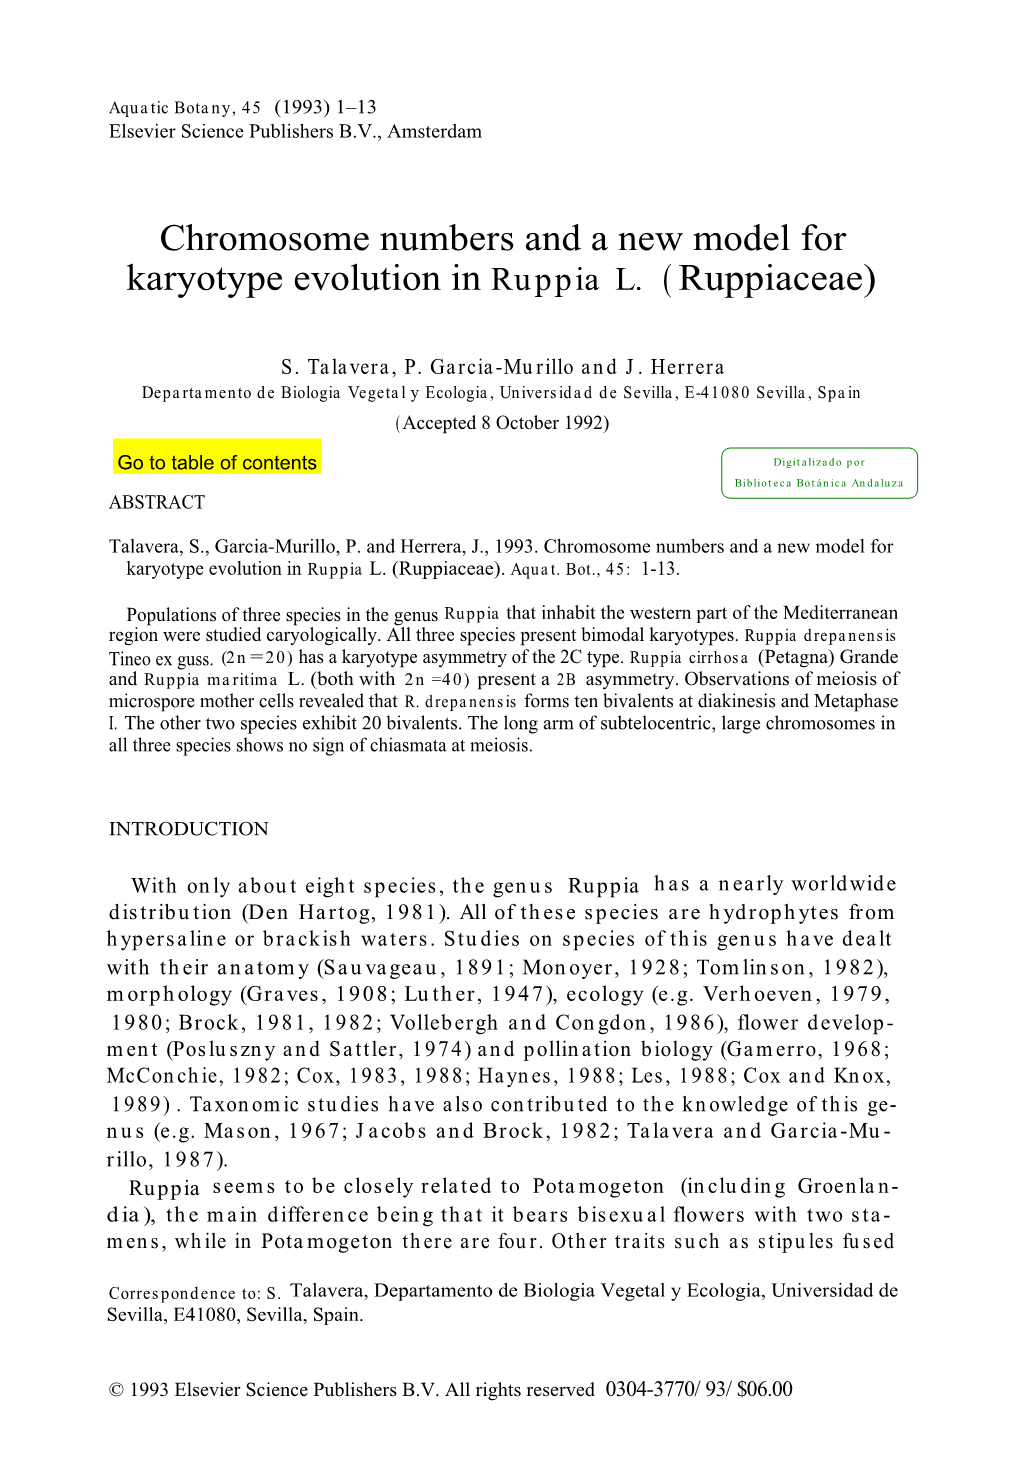 Chromosome Numbers and a New Model for Karyotype Evolution in Ruppia L. ( Ruppiaceae)